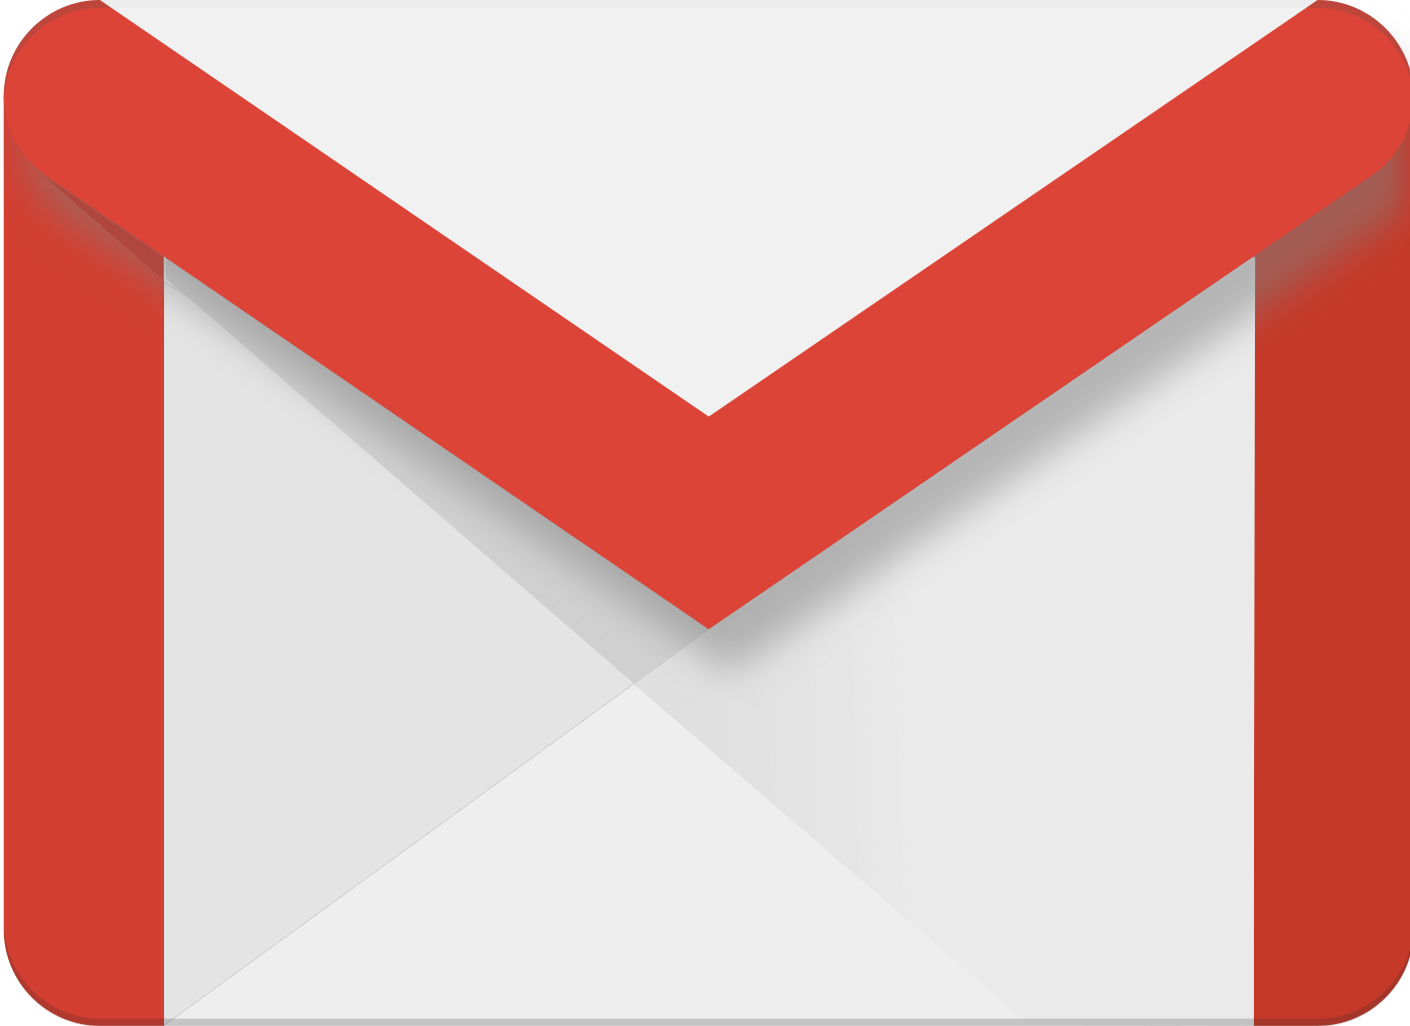 Effortlessly automate Gmail attachments